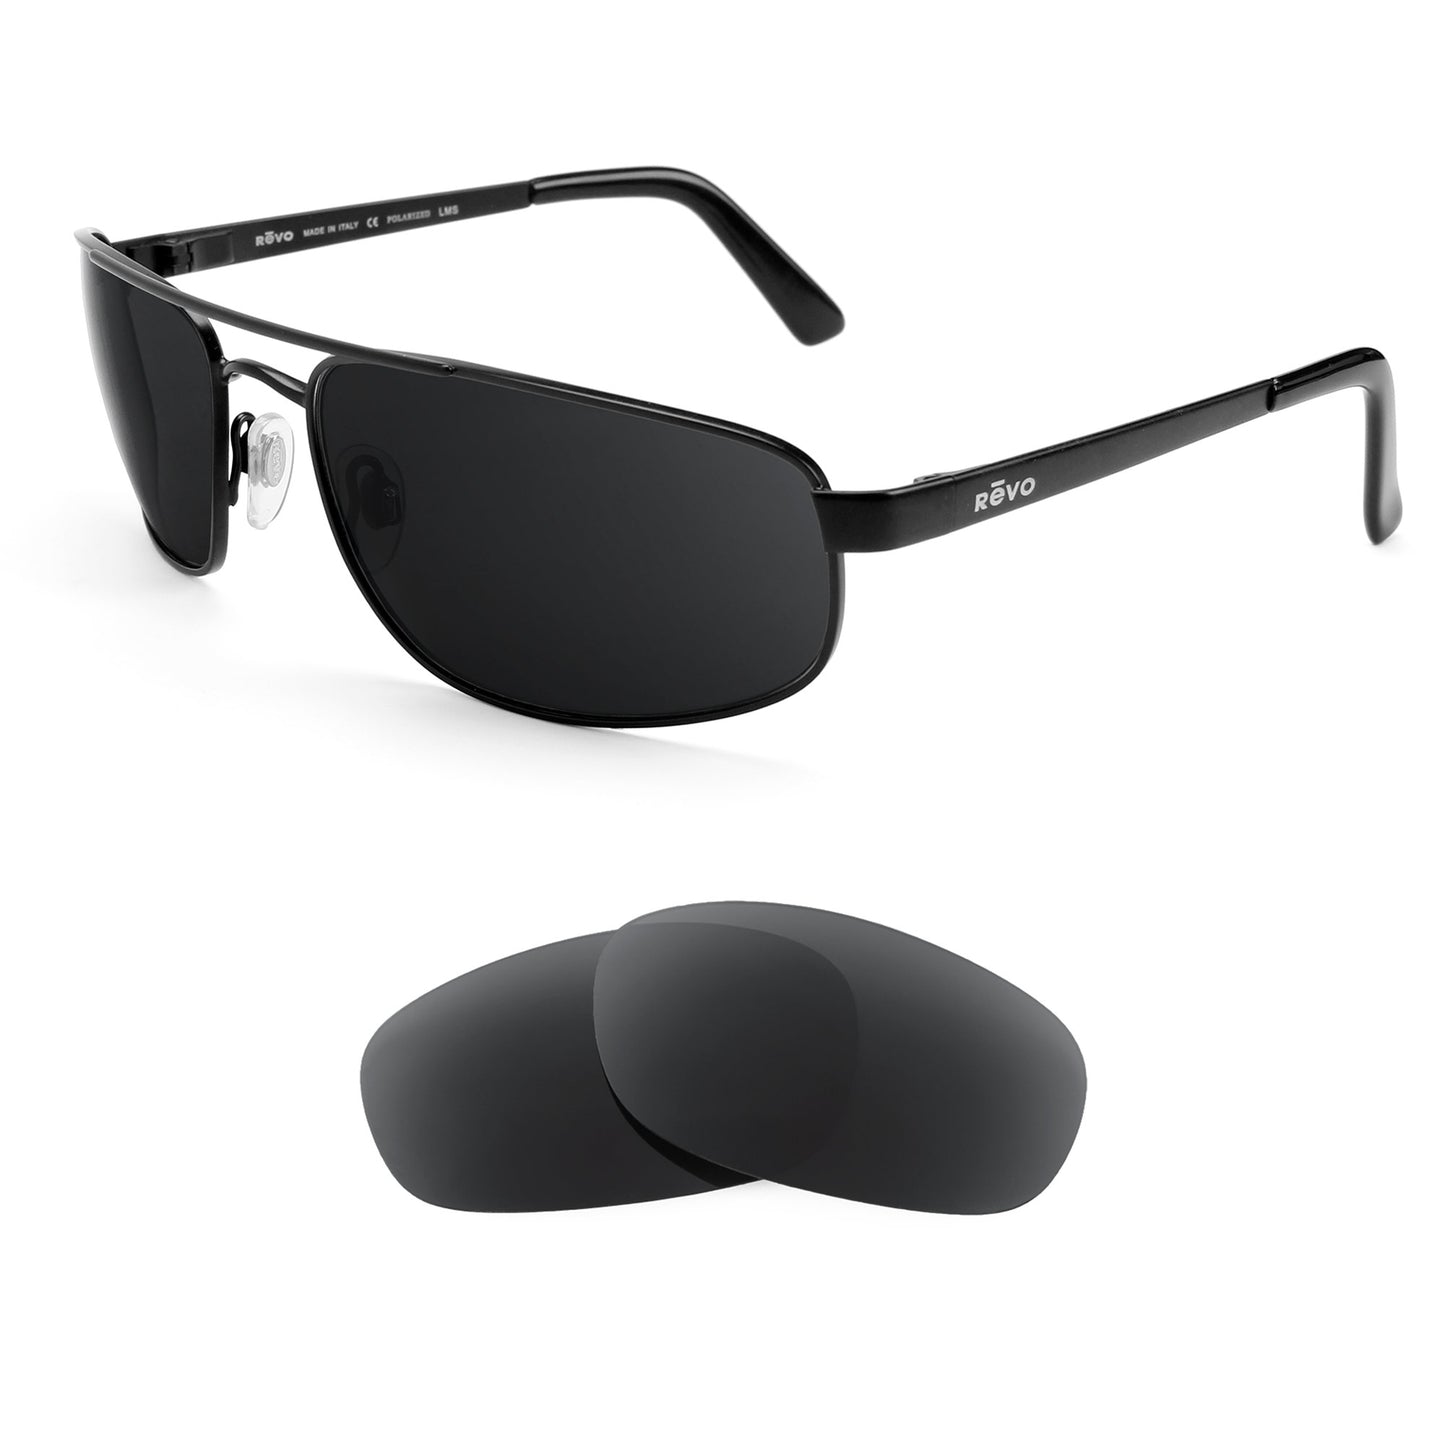 Revo 3014 sunglasses with replacement lenses